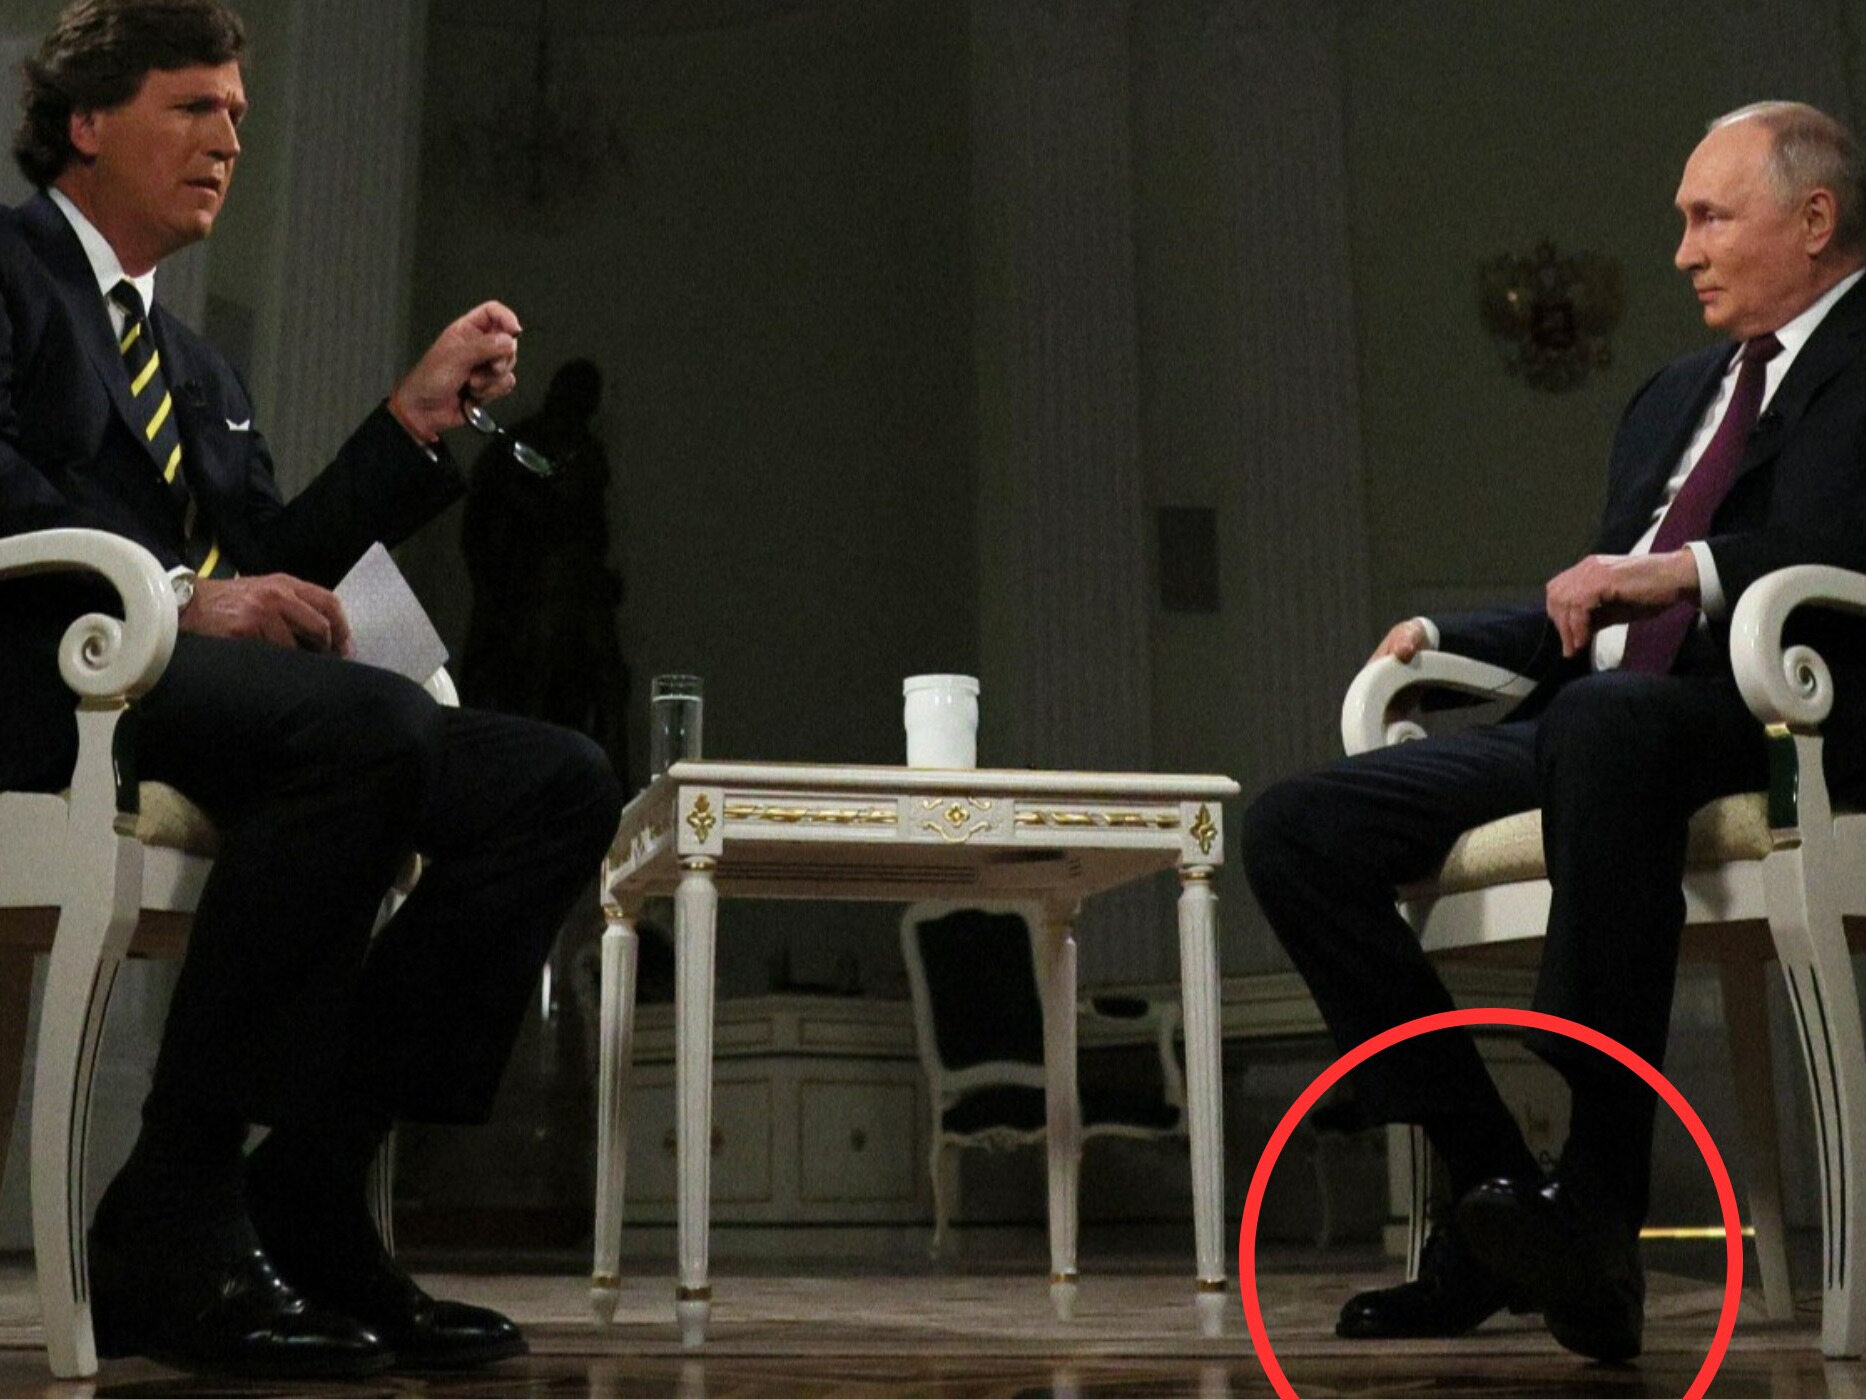 This fragment of the interview with Putin was watched by 2.3 million people.  “What's wrong with his leg?”